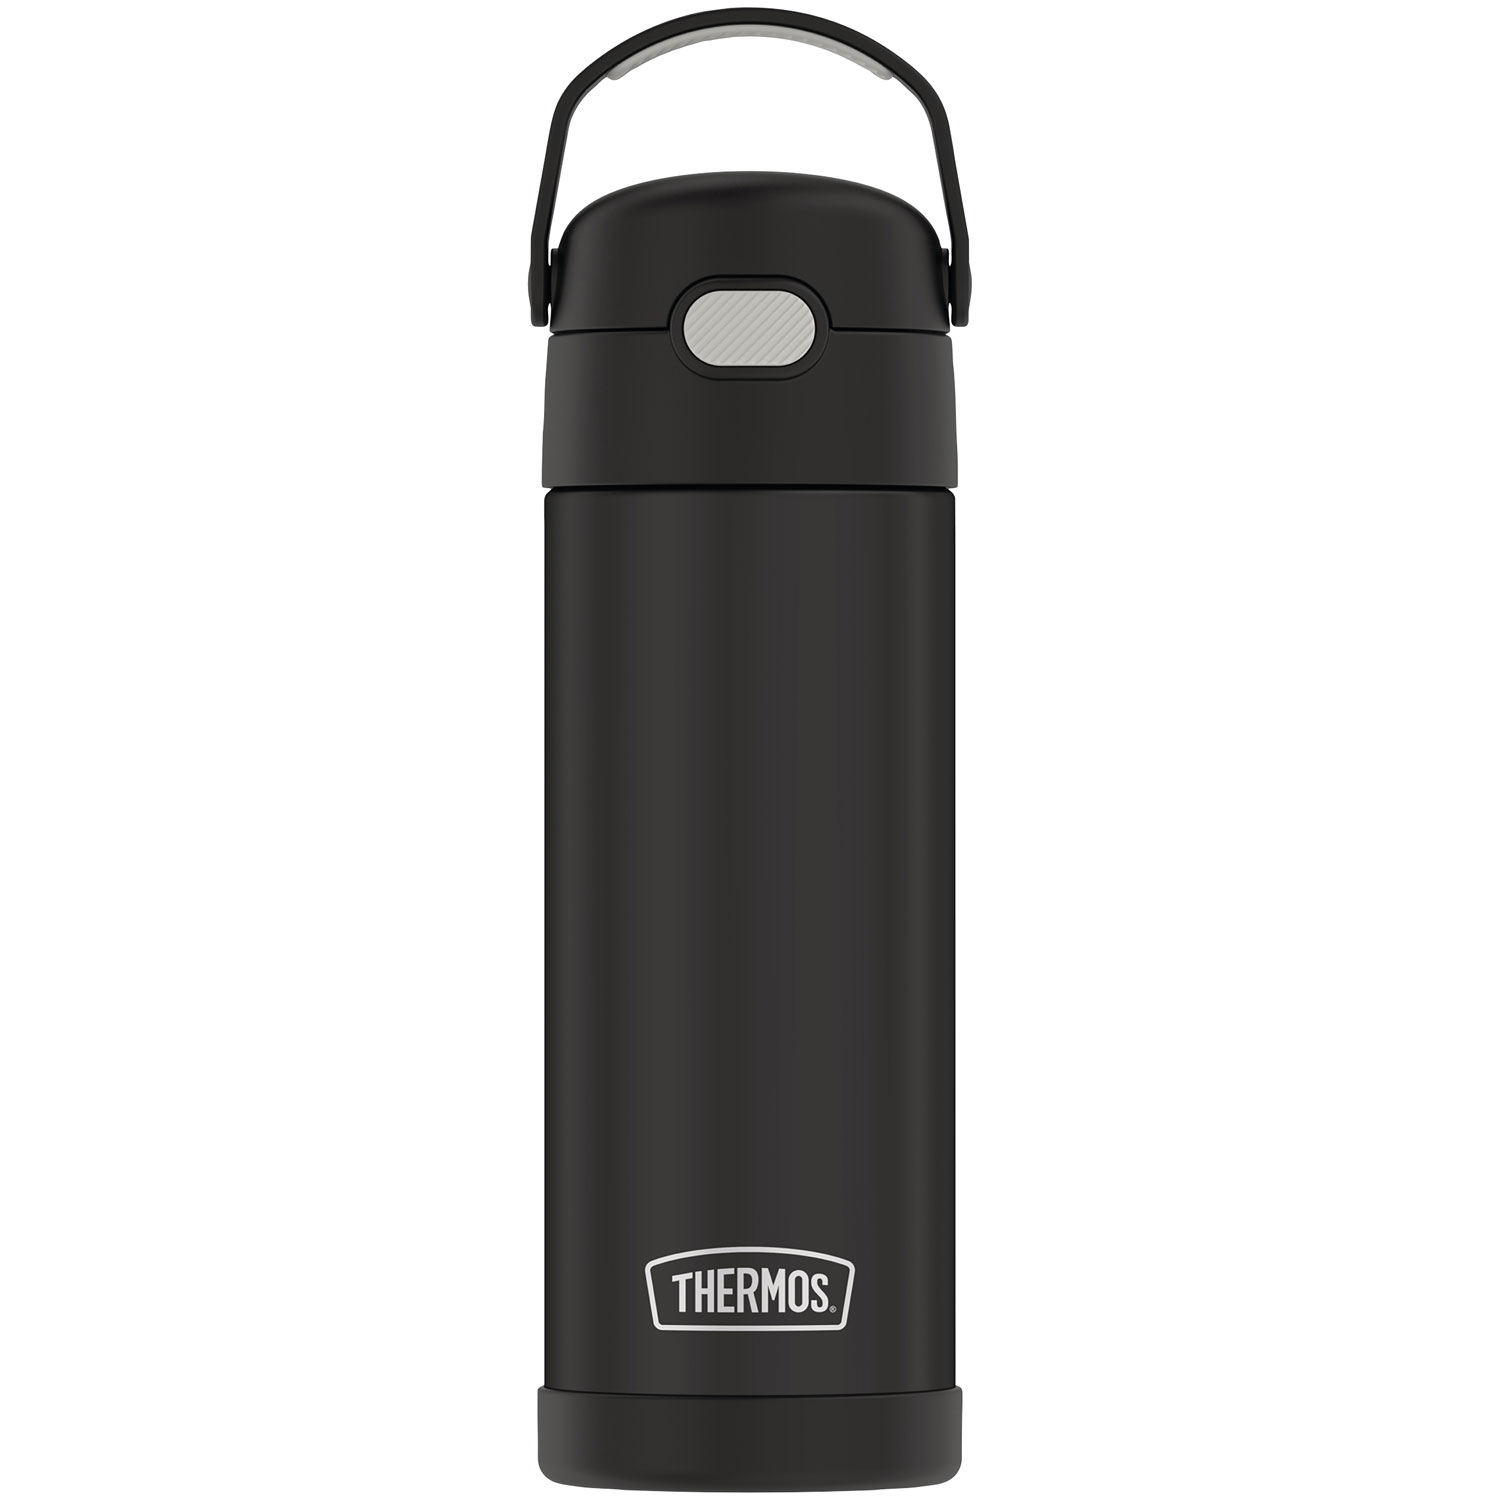 Thermos FUNtainer 350ml (12 oz.) Stainless Steel Water Bottle with Pop-up Straw - Black